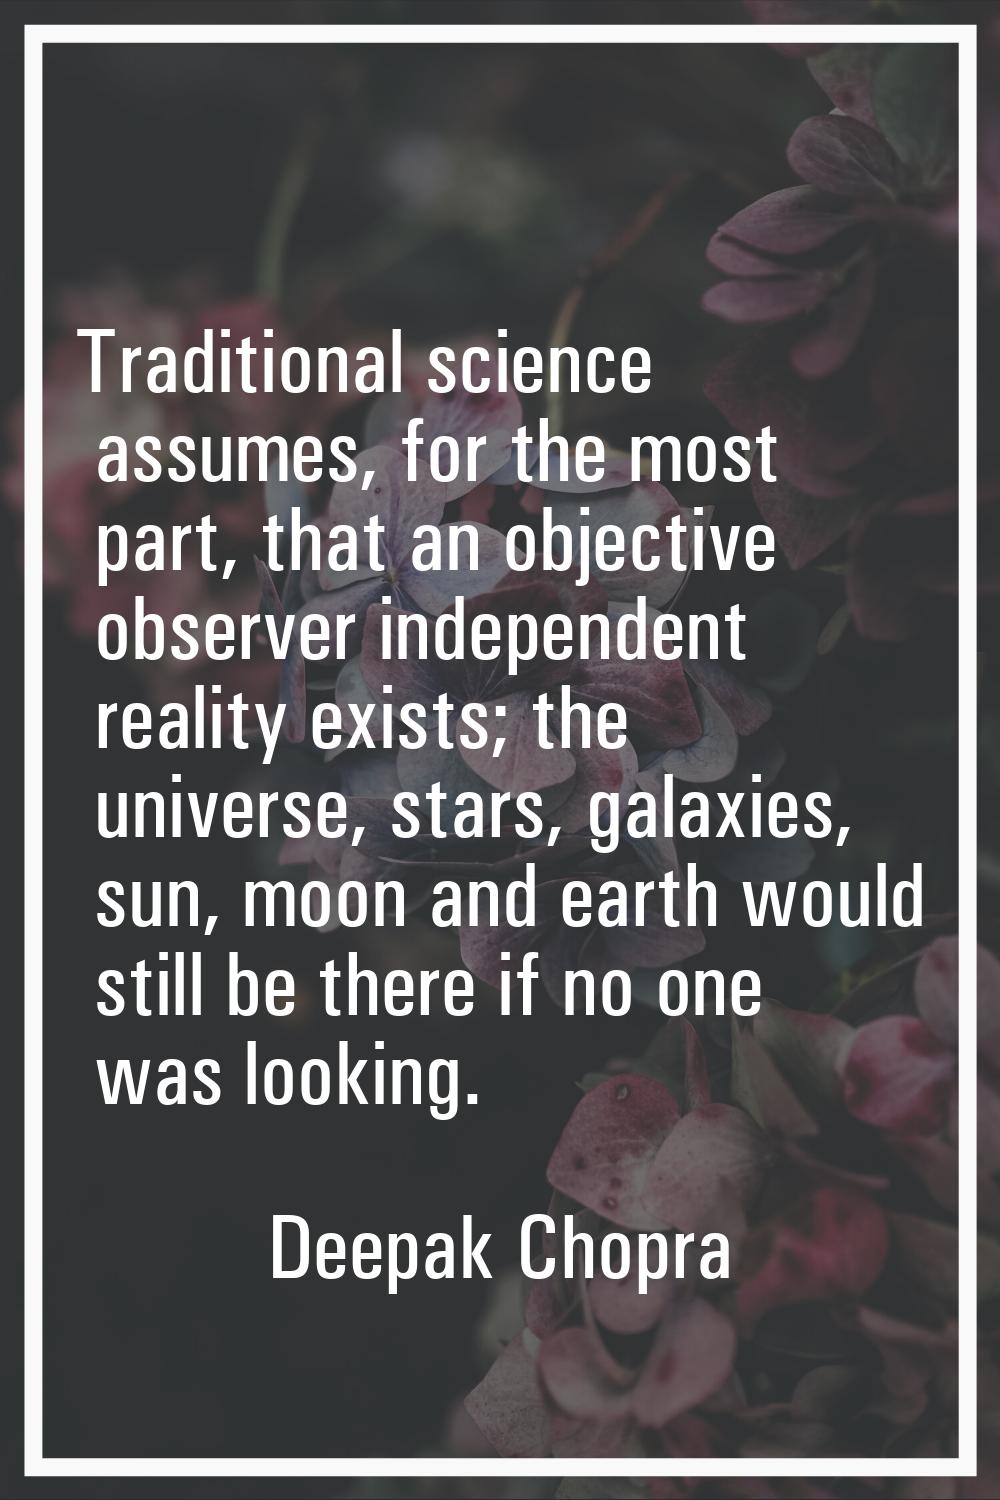 Traditional science assumes, for the most part, that an objective observer independent reality exis